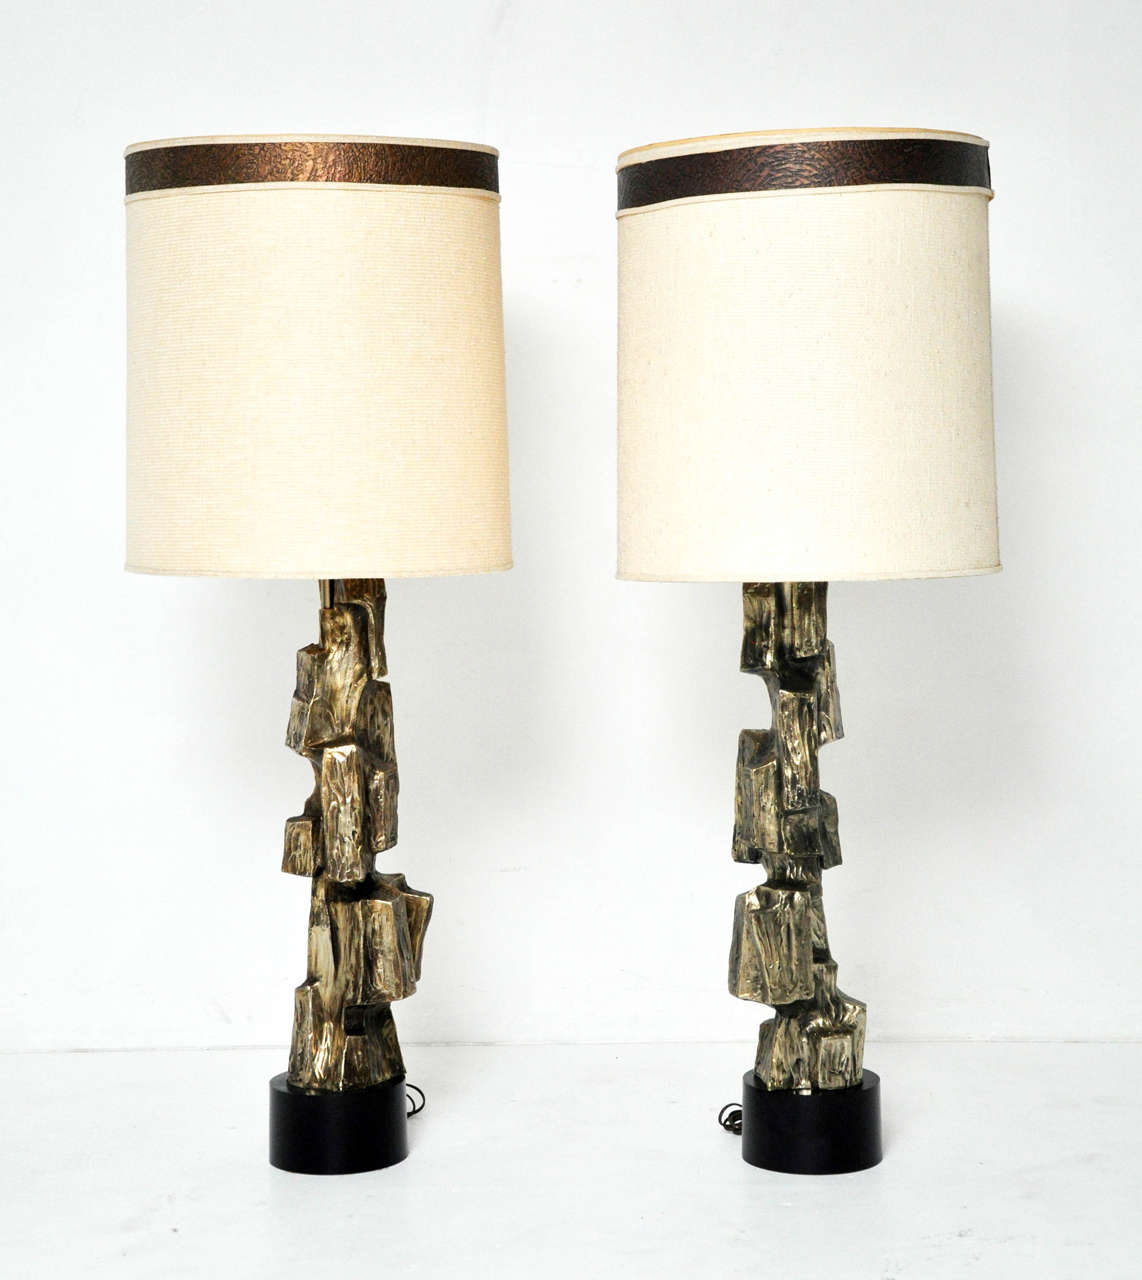 Pair of brutalist table lamps designed by Maurizio Tempestini for Laurel.